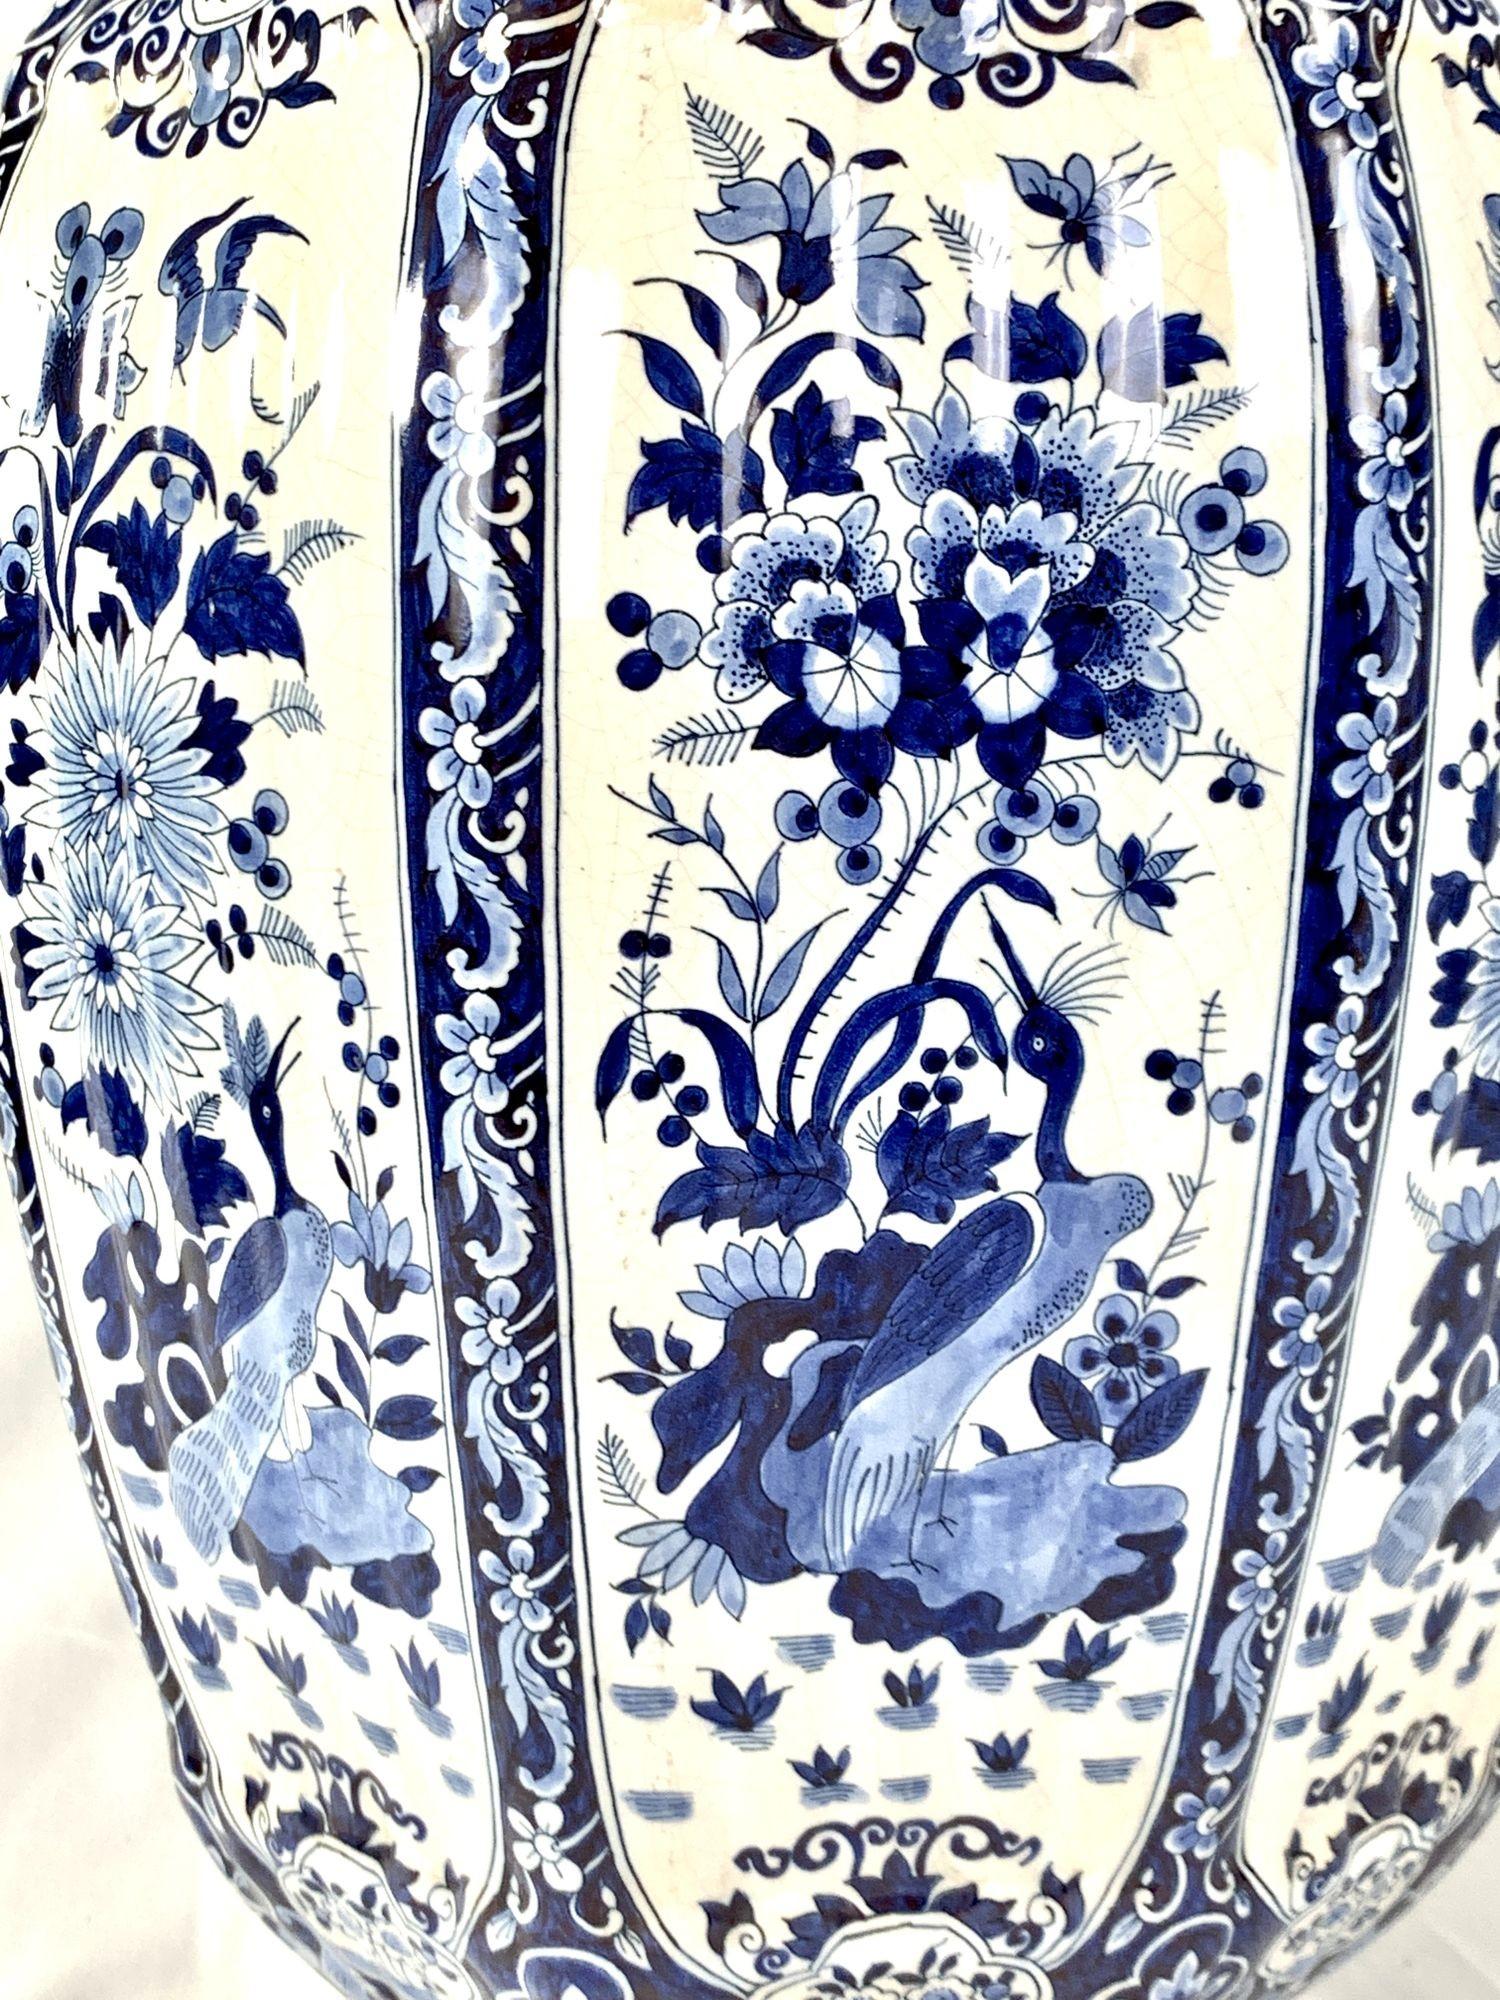 This large Delft jar has a traditional bird and flower decoration painted on a white tin-glazed ground. 
The decoration captures the beauty of a garden with birds amidst a sea of vibrant flowers. 
The design on the shoulders and cover is a classic